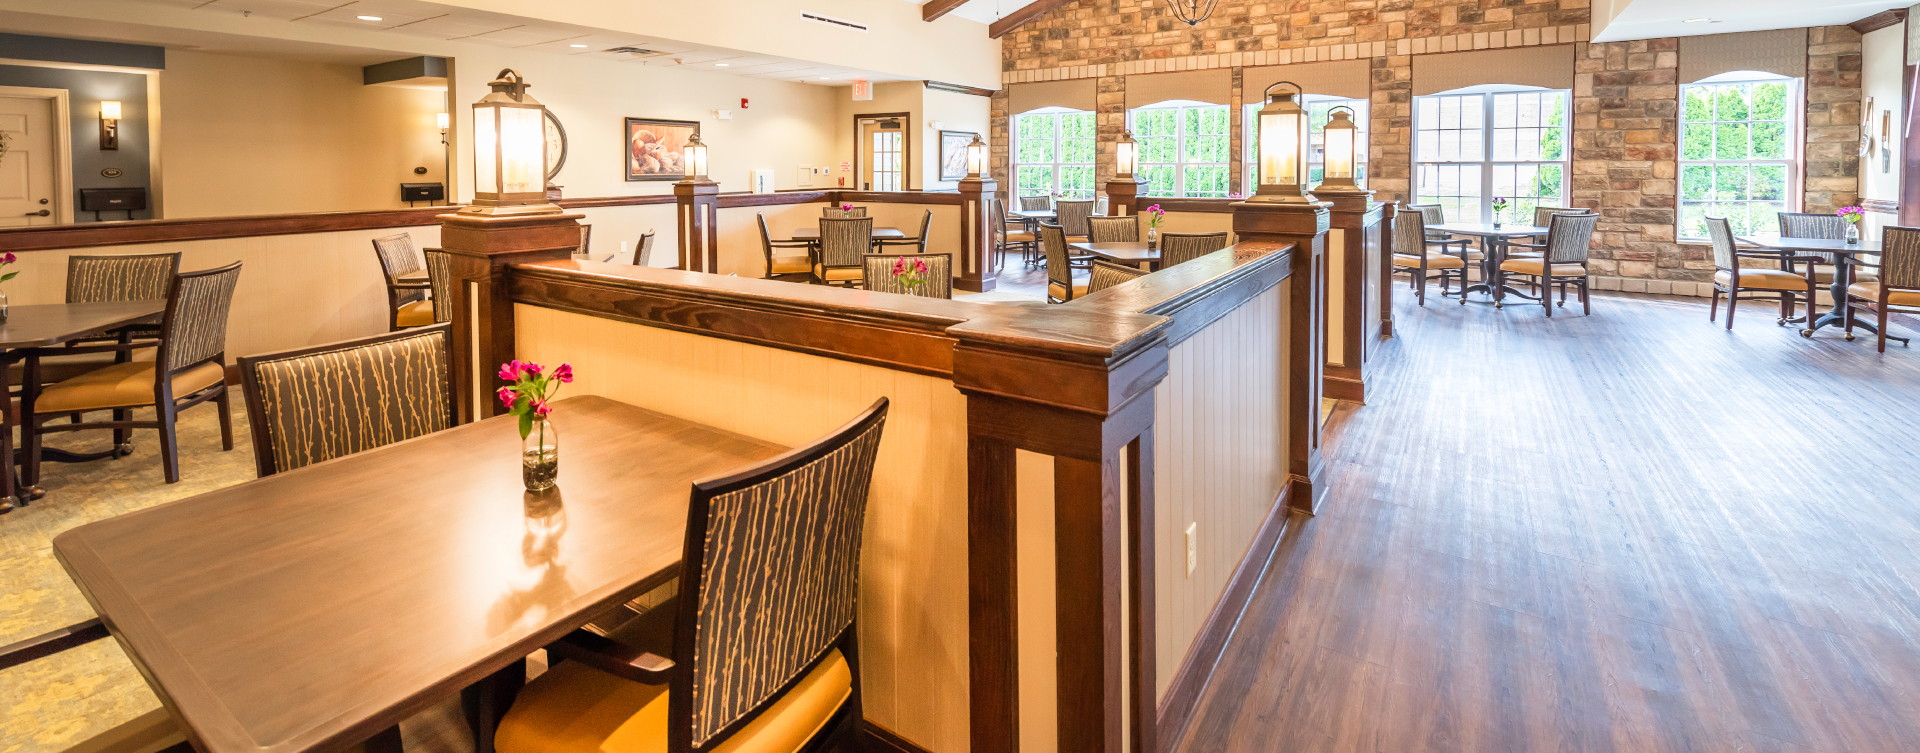 Food is best when shared with friends in the dining room at Bickford of Shelby Township